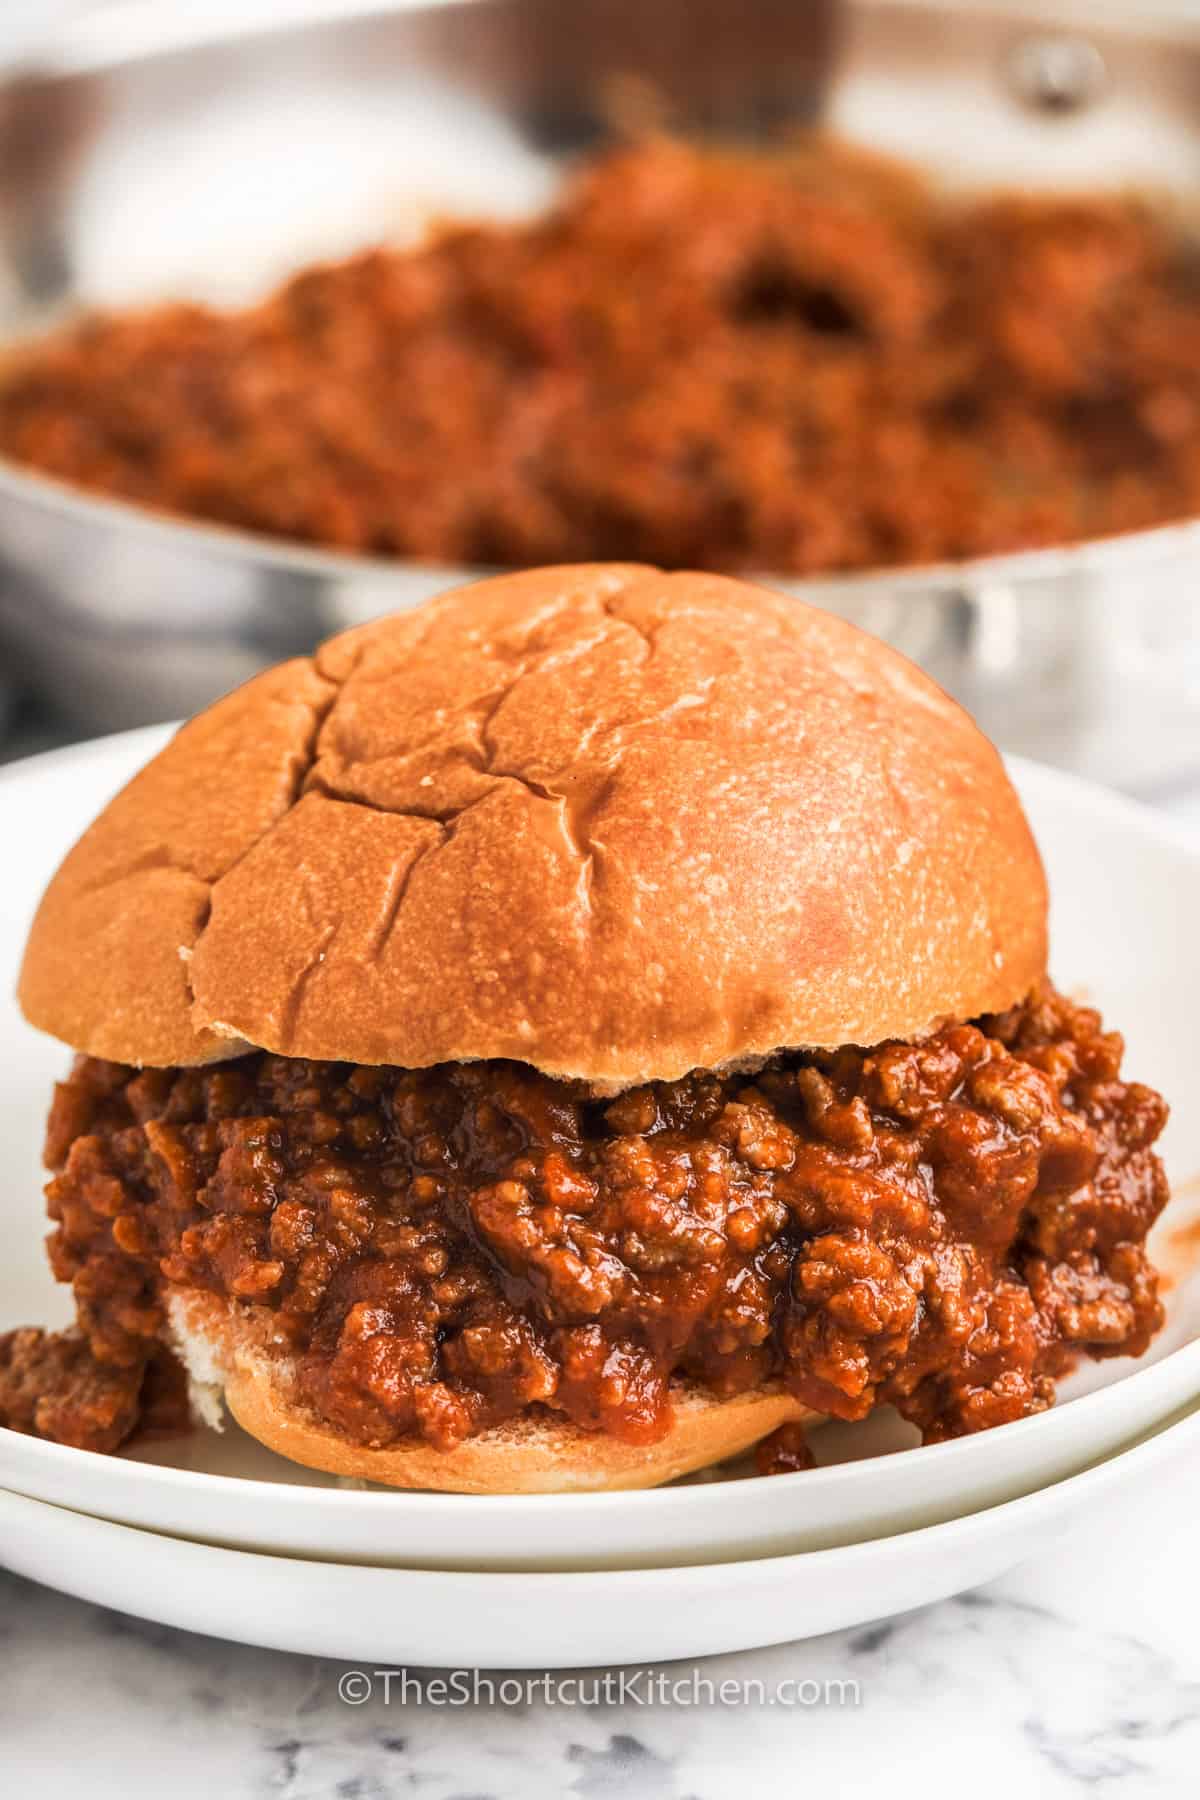 plated sloppy Joe with Homemade Sloppy Joe Sauce in a pan in the background